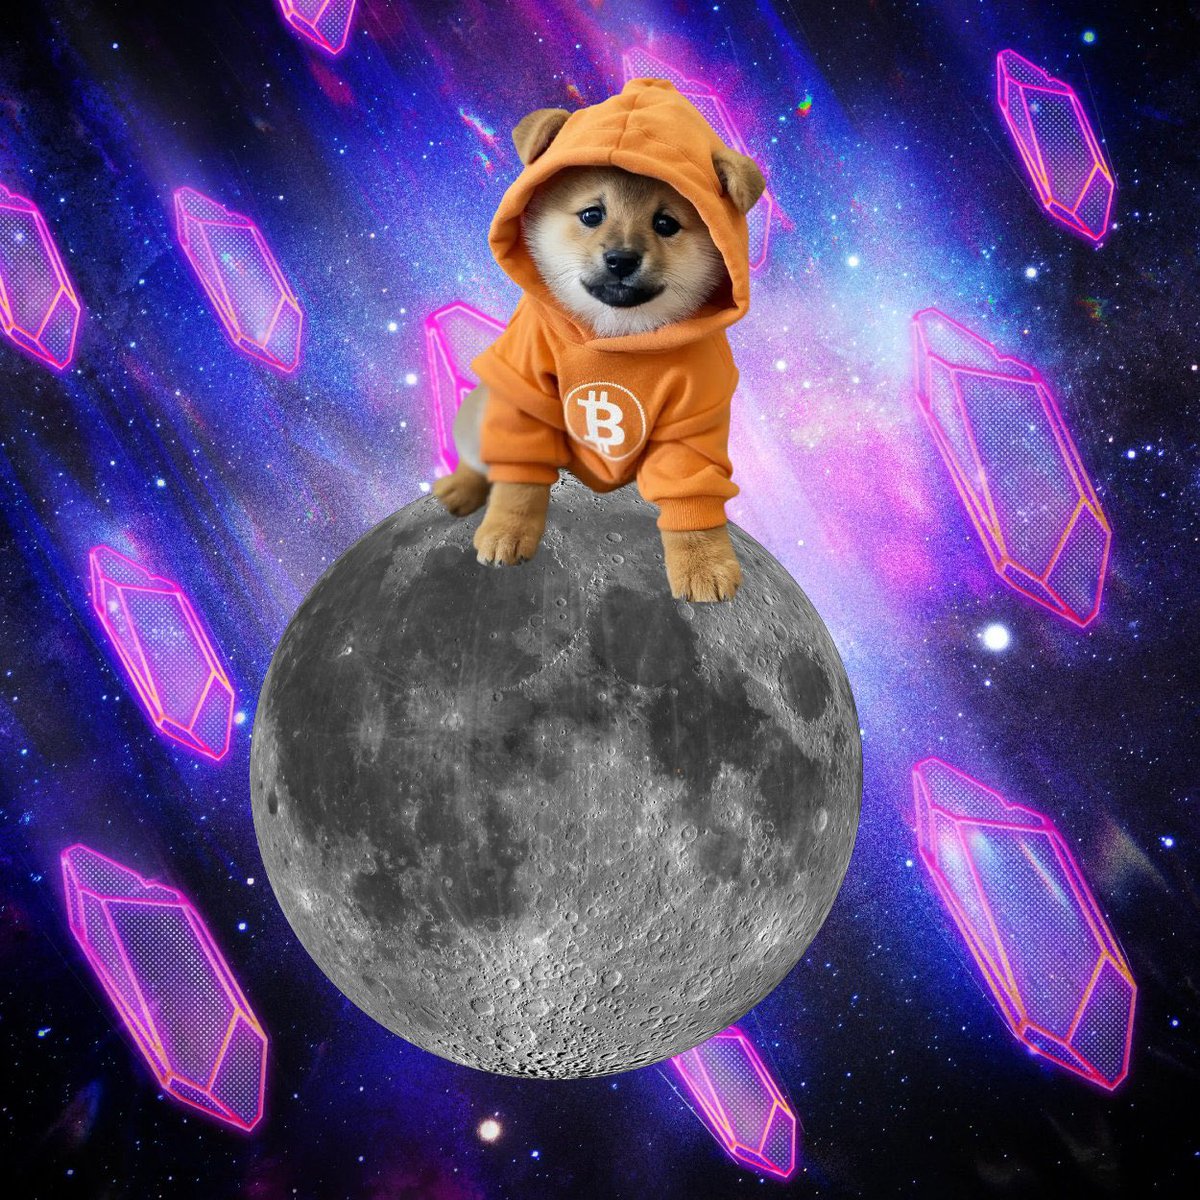 DOG•GO•TO•THE•MOON GIVEAWAY! Prize: 25.000 $DOG 🐕 To Join: 1. Follow @therunexio & @ordcoming & @0xmeetyo & @ordinals_ga 2. Like & RT 3. Tag 2 frens Winner will be announced in 48hrs. #Runes #Bitcoin